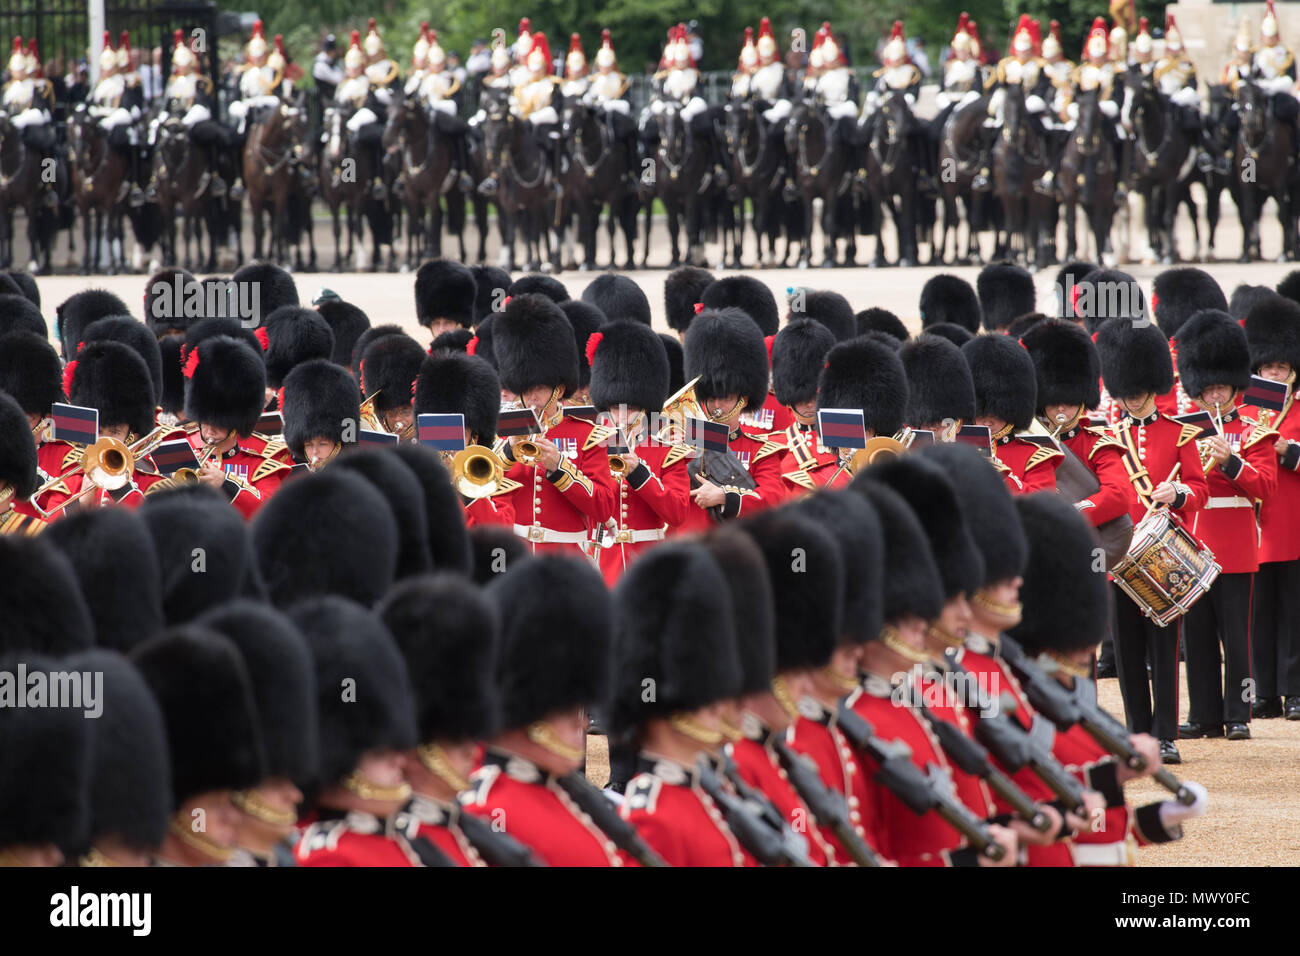 Soldiers perform during the Colonel's Review, which is the final rehearsal for Trooping the Colour, the Queen's annual birthday parade, in Central London. Stock Photo